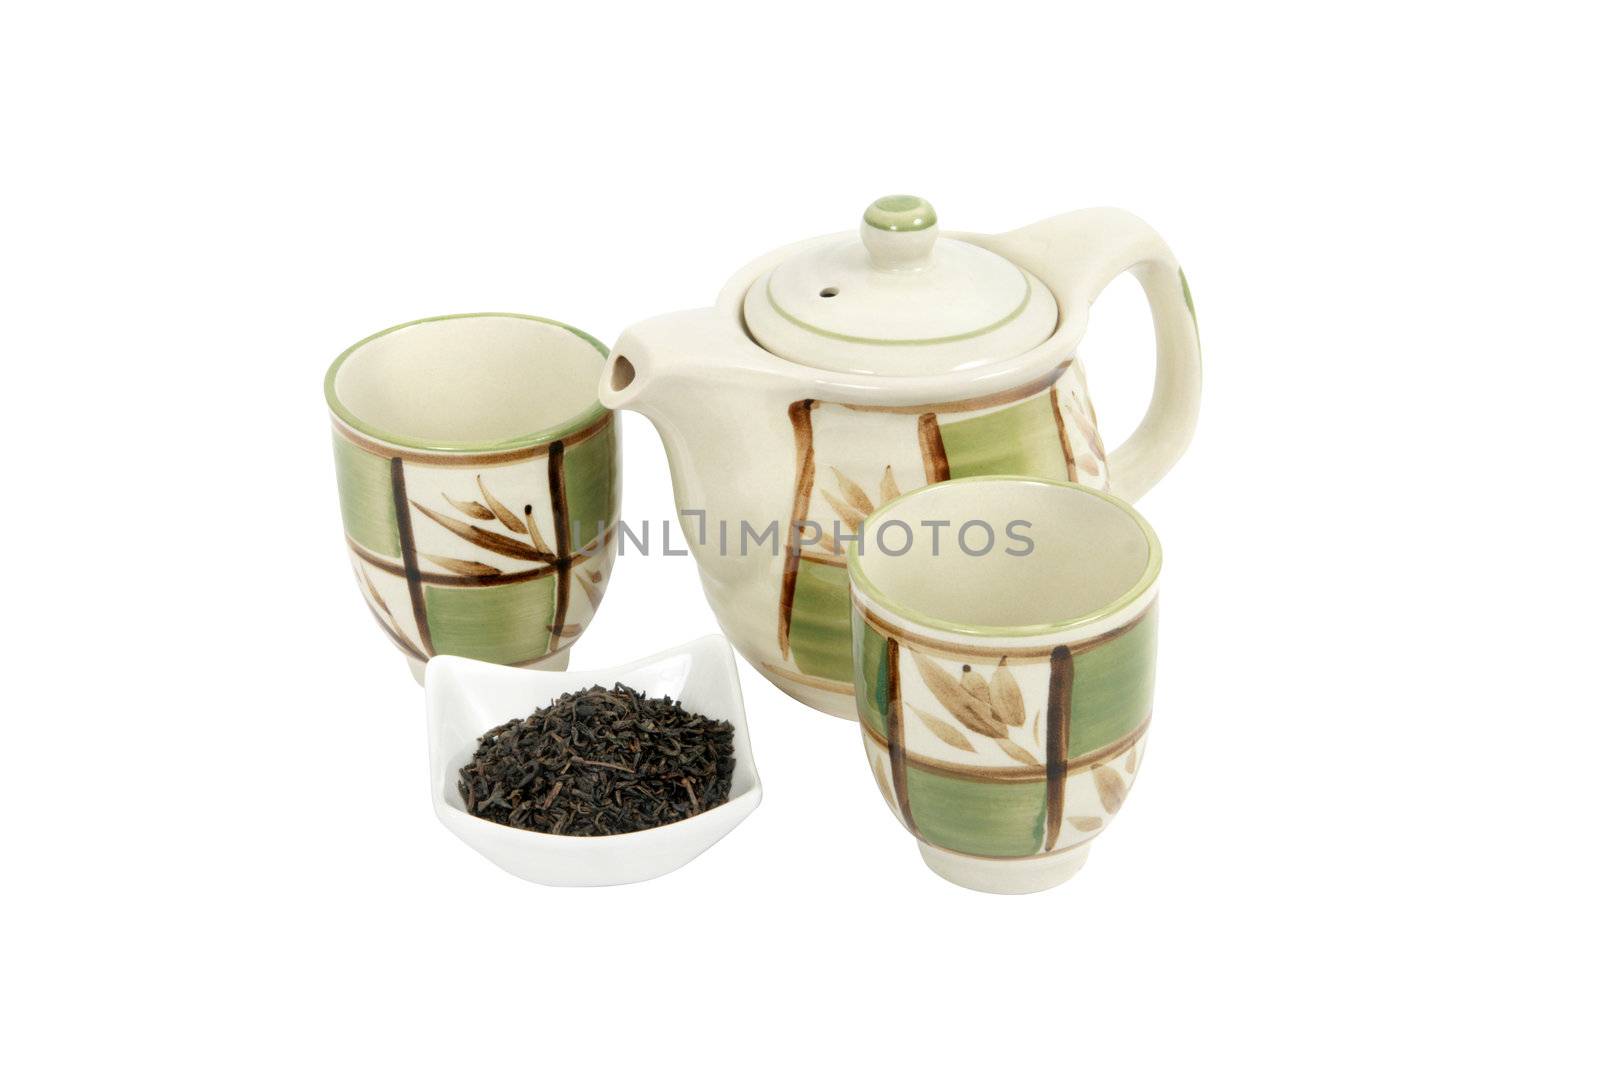 A porcelain tea set comprising one decorated teapot, two decorated teacups and a container holding shredded tea leaves on white background. Clipping path included.